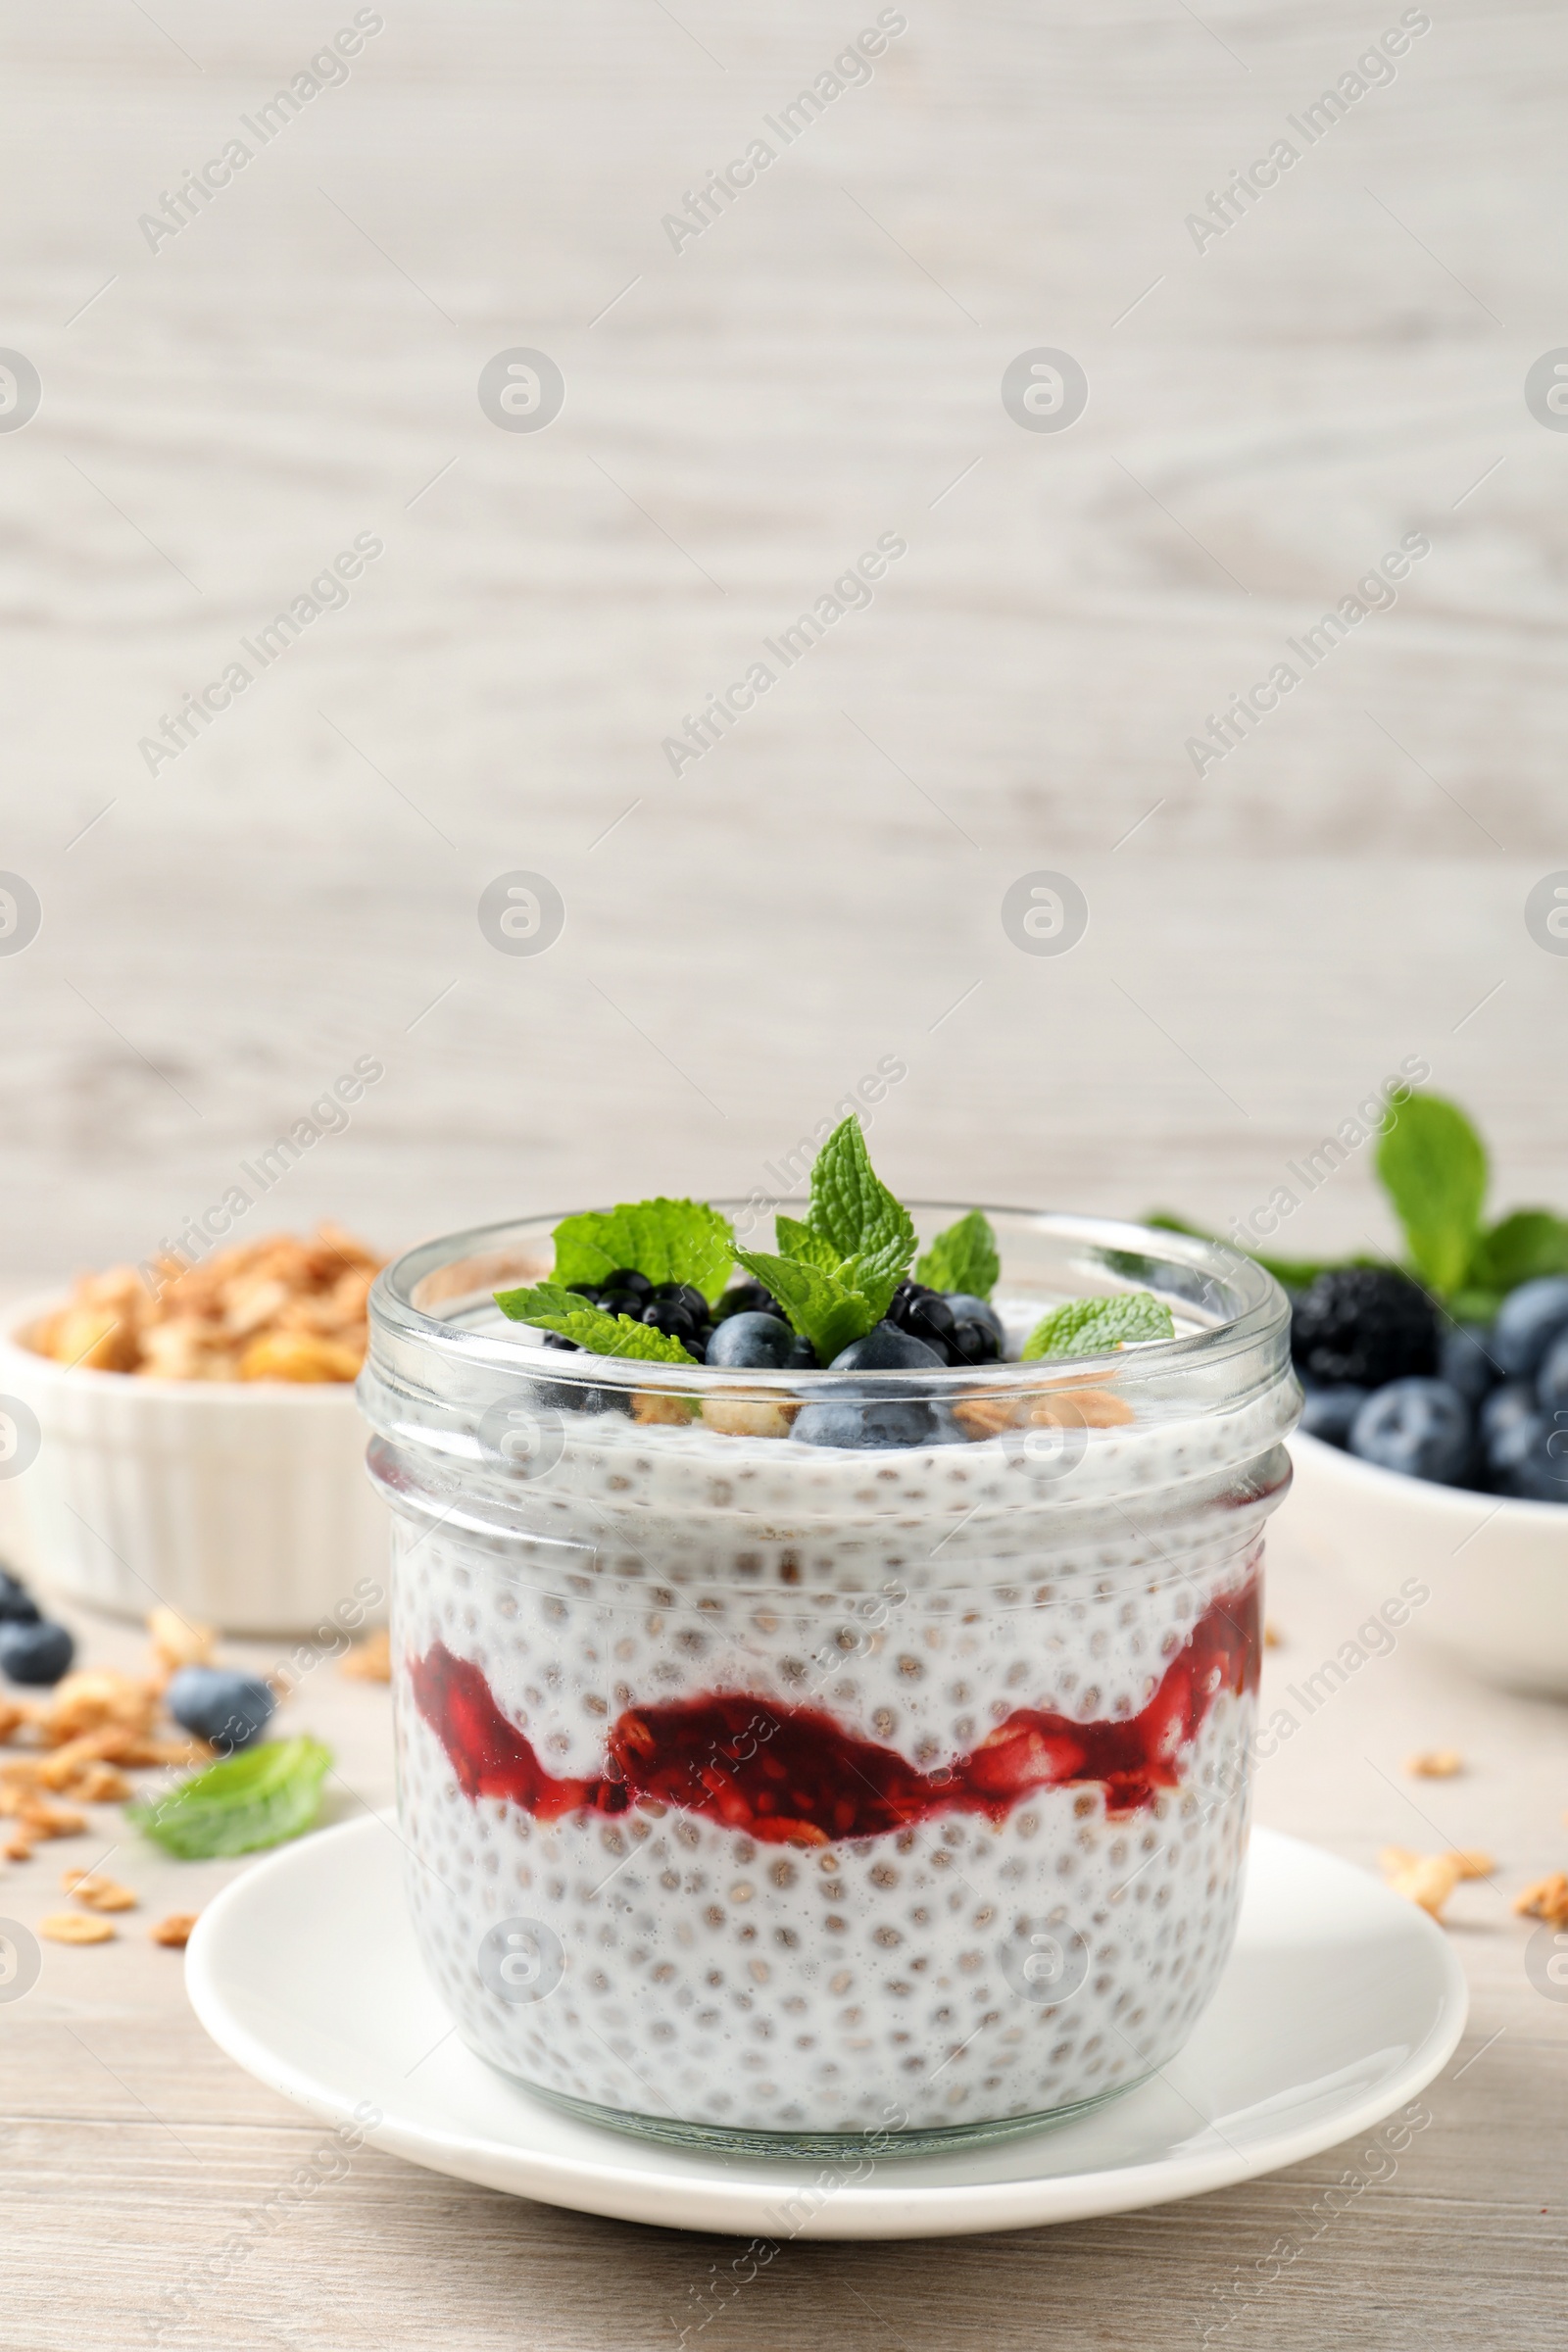 Photo of Delicious chia pudding with berries and granola on wooden table